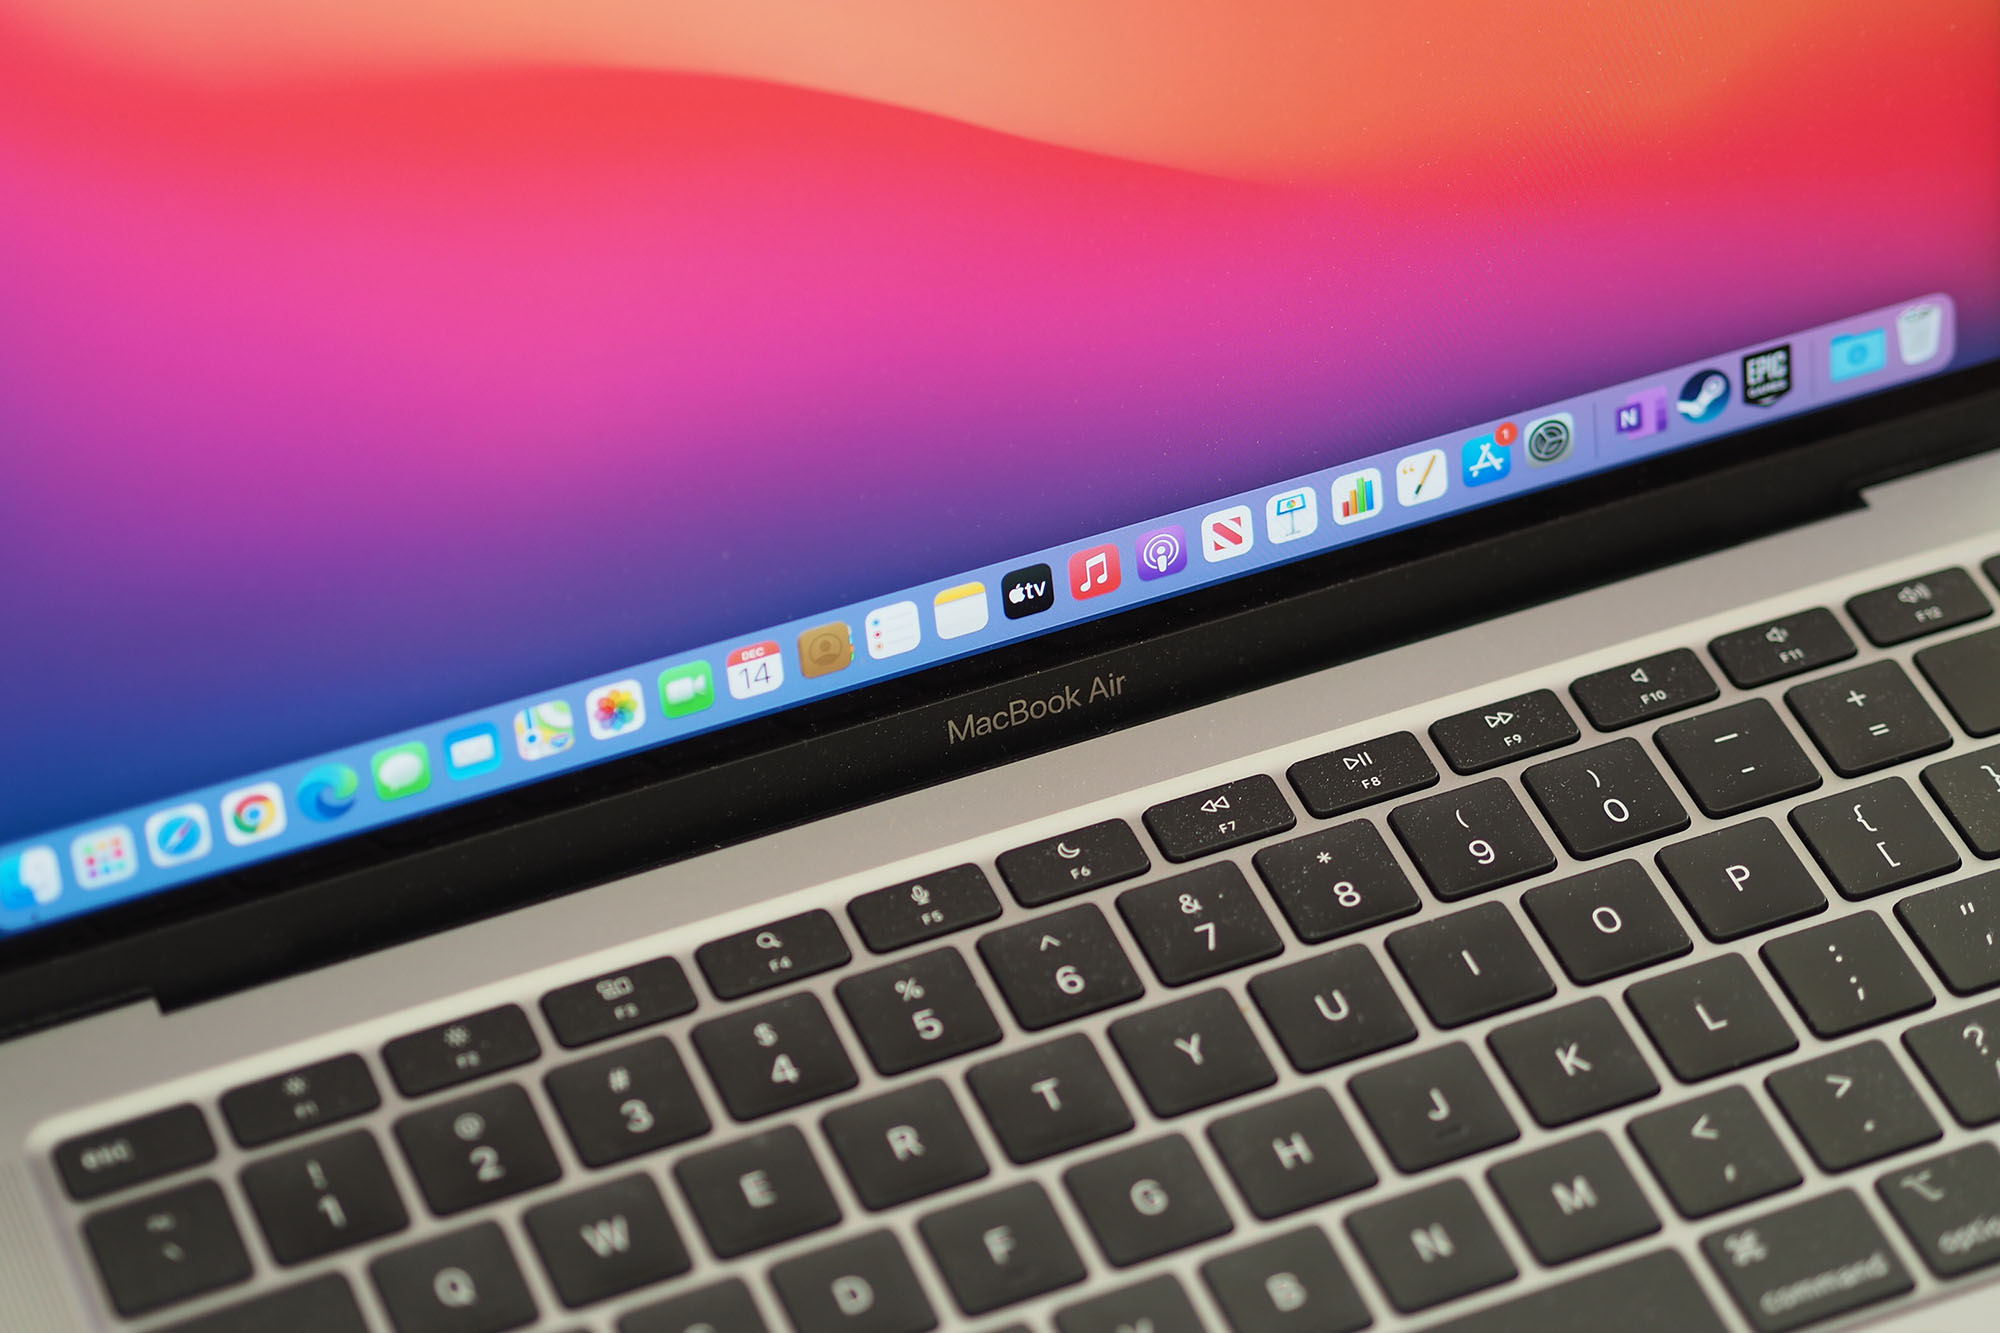 MacBook Air M1 review: Stunning debut for Apple silicon in a Mac